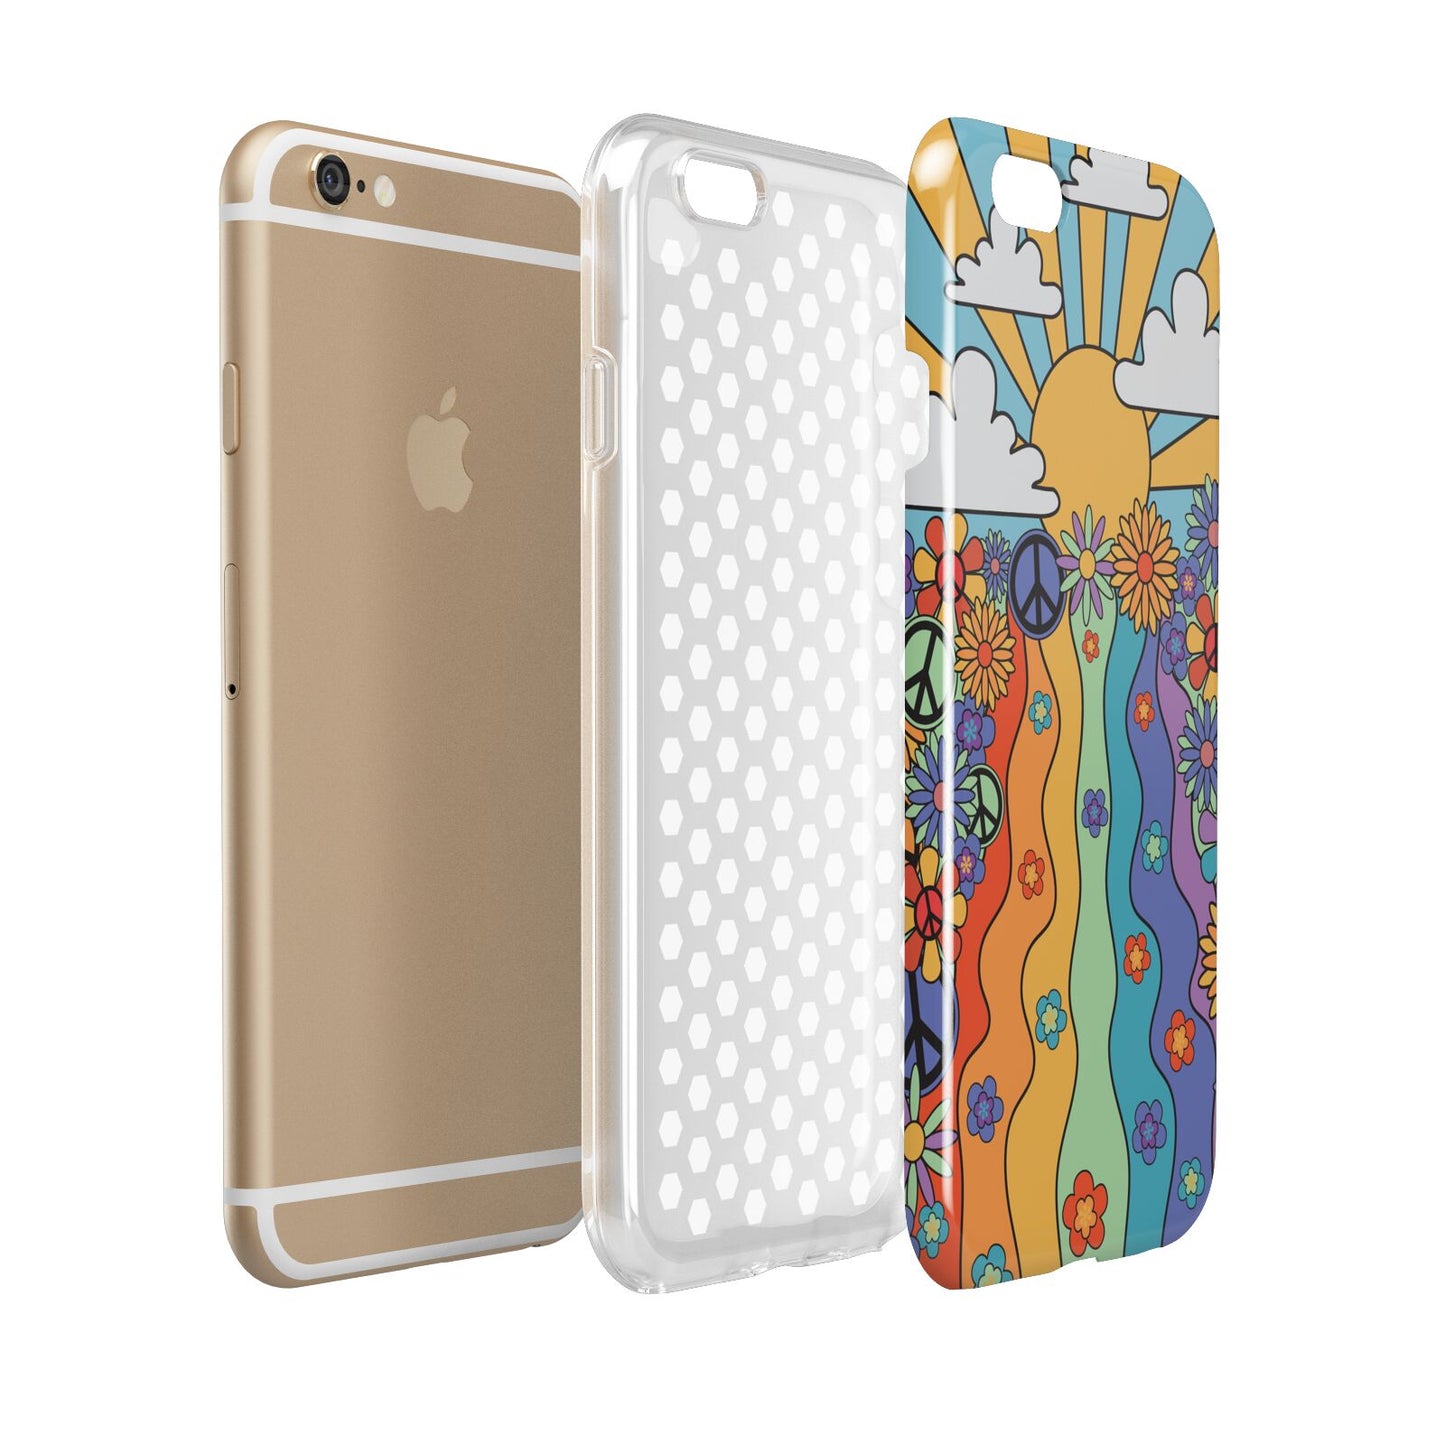 Seventies Groovy Retro Apple iPhone 6 3D Tough Case Expanded view